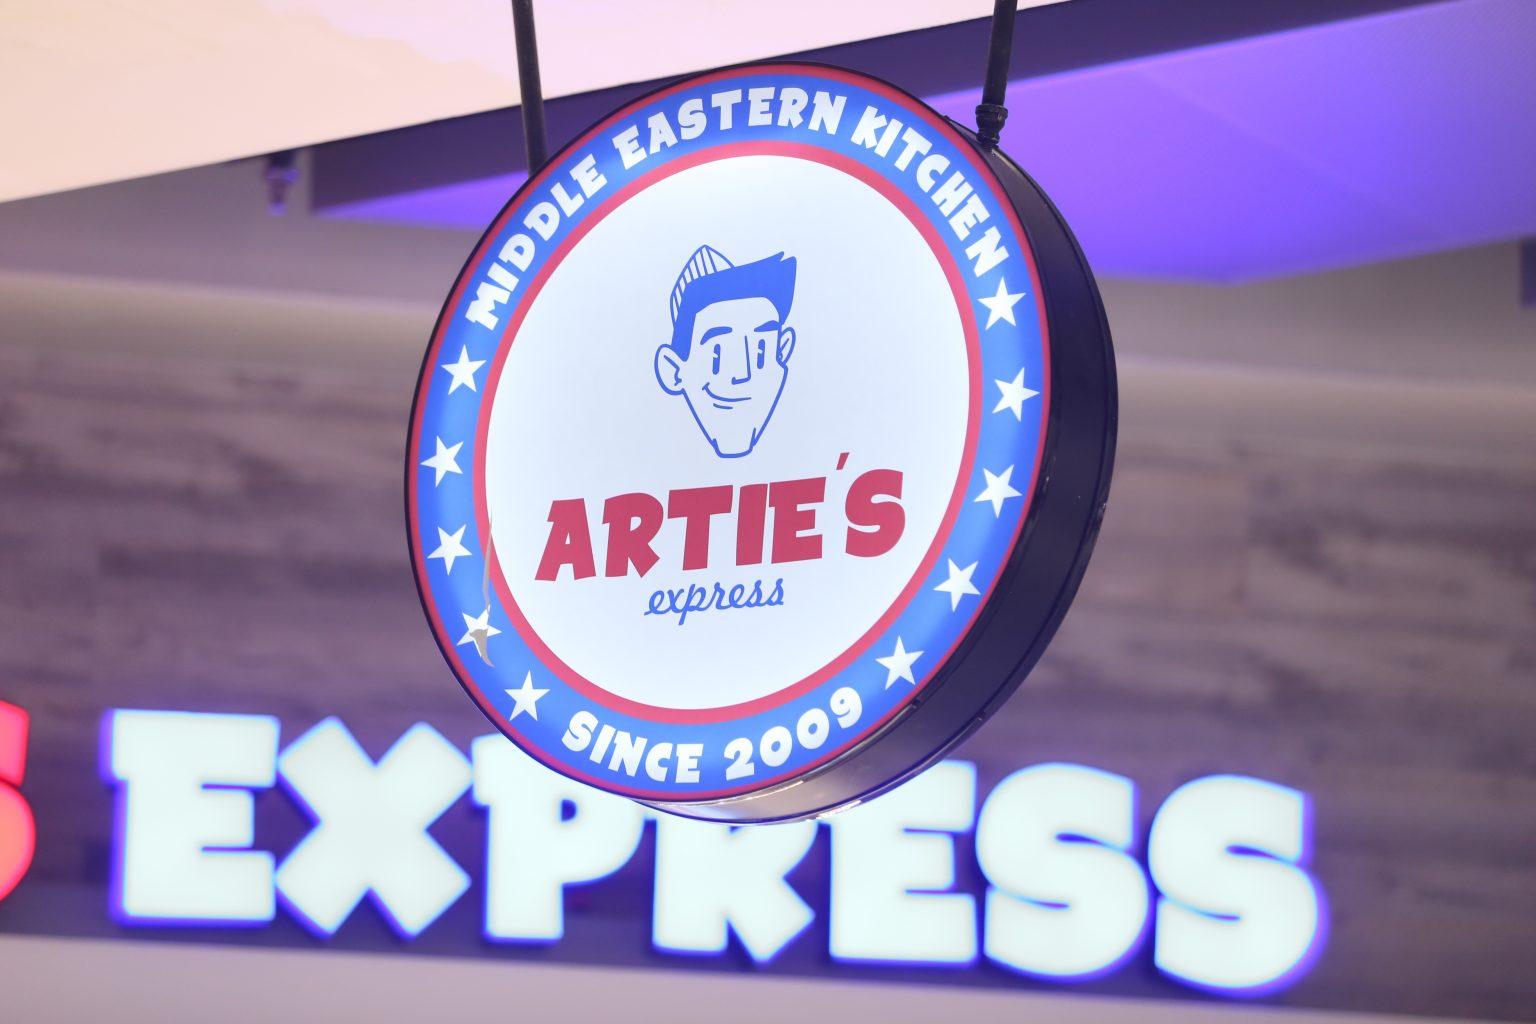 One year later, Artie's Express becomes a leading dining leader